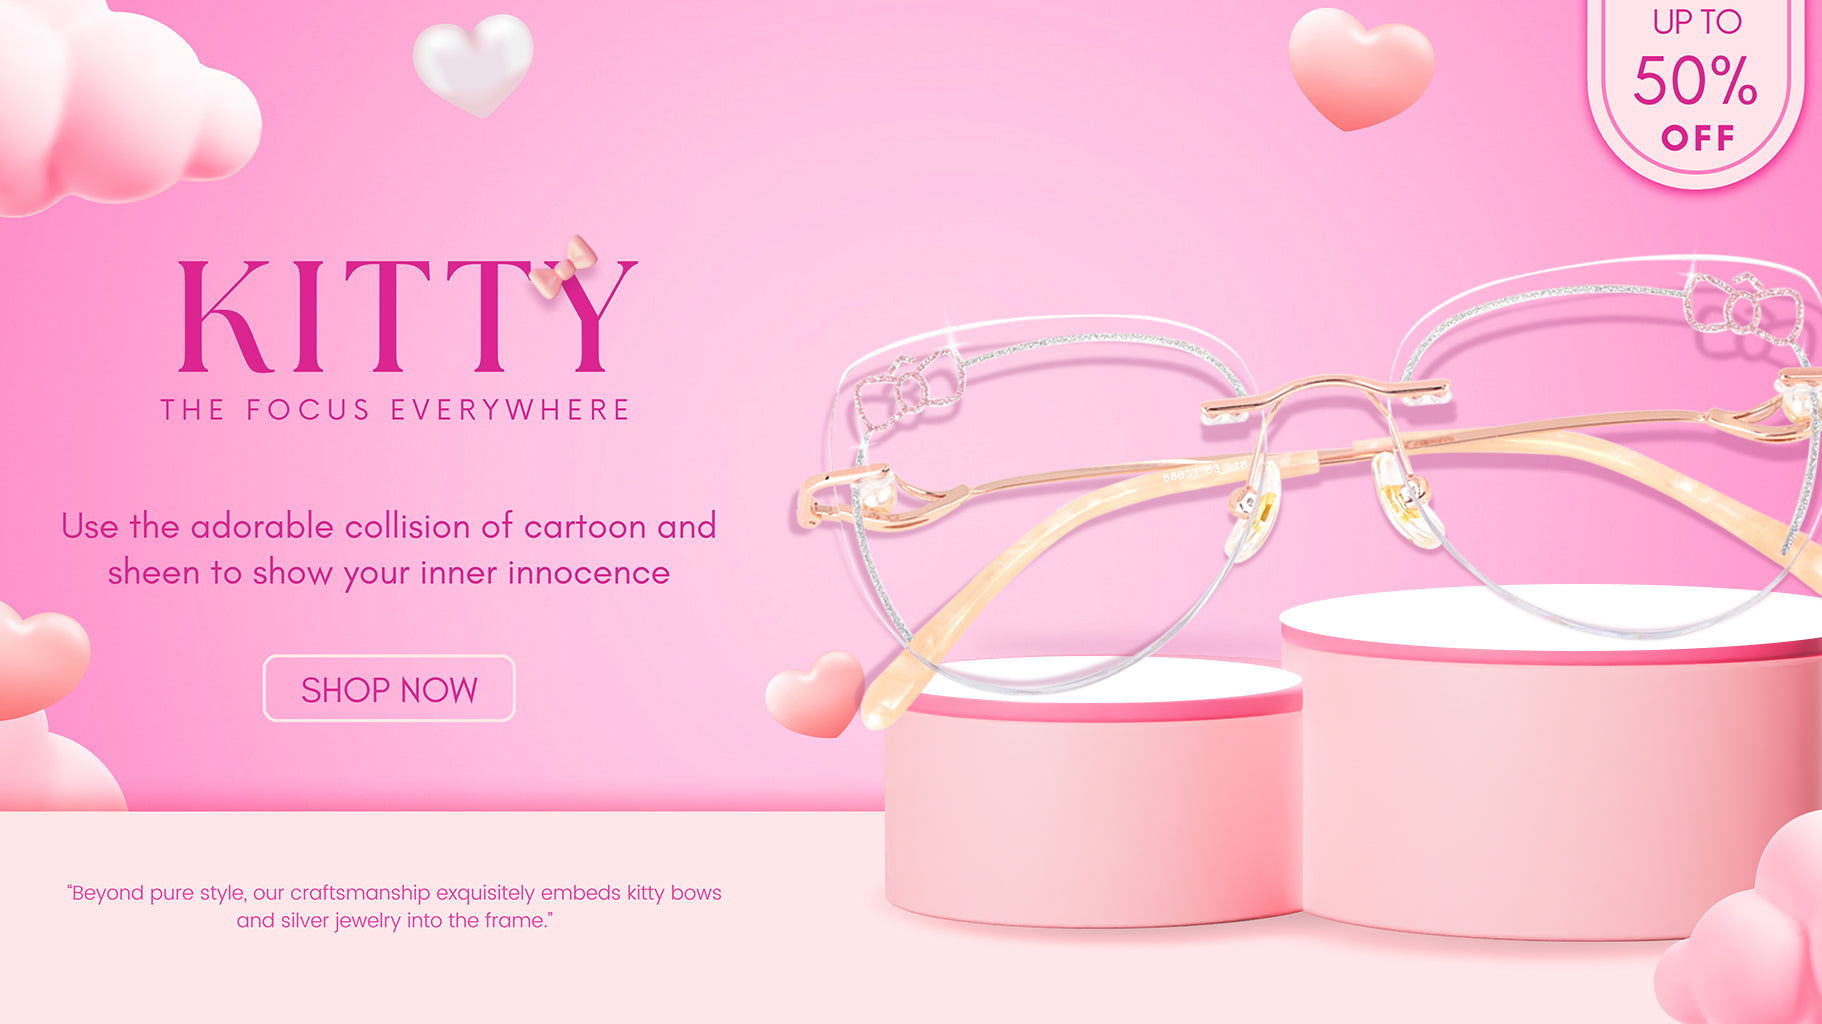 New Eyeglasses Release: Meet Kitty - Your Royal Companion